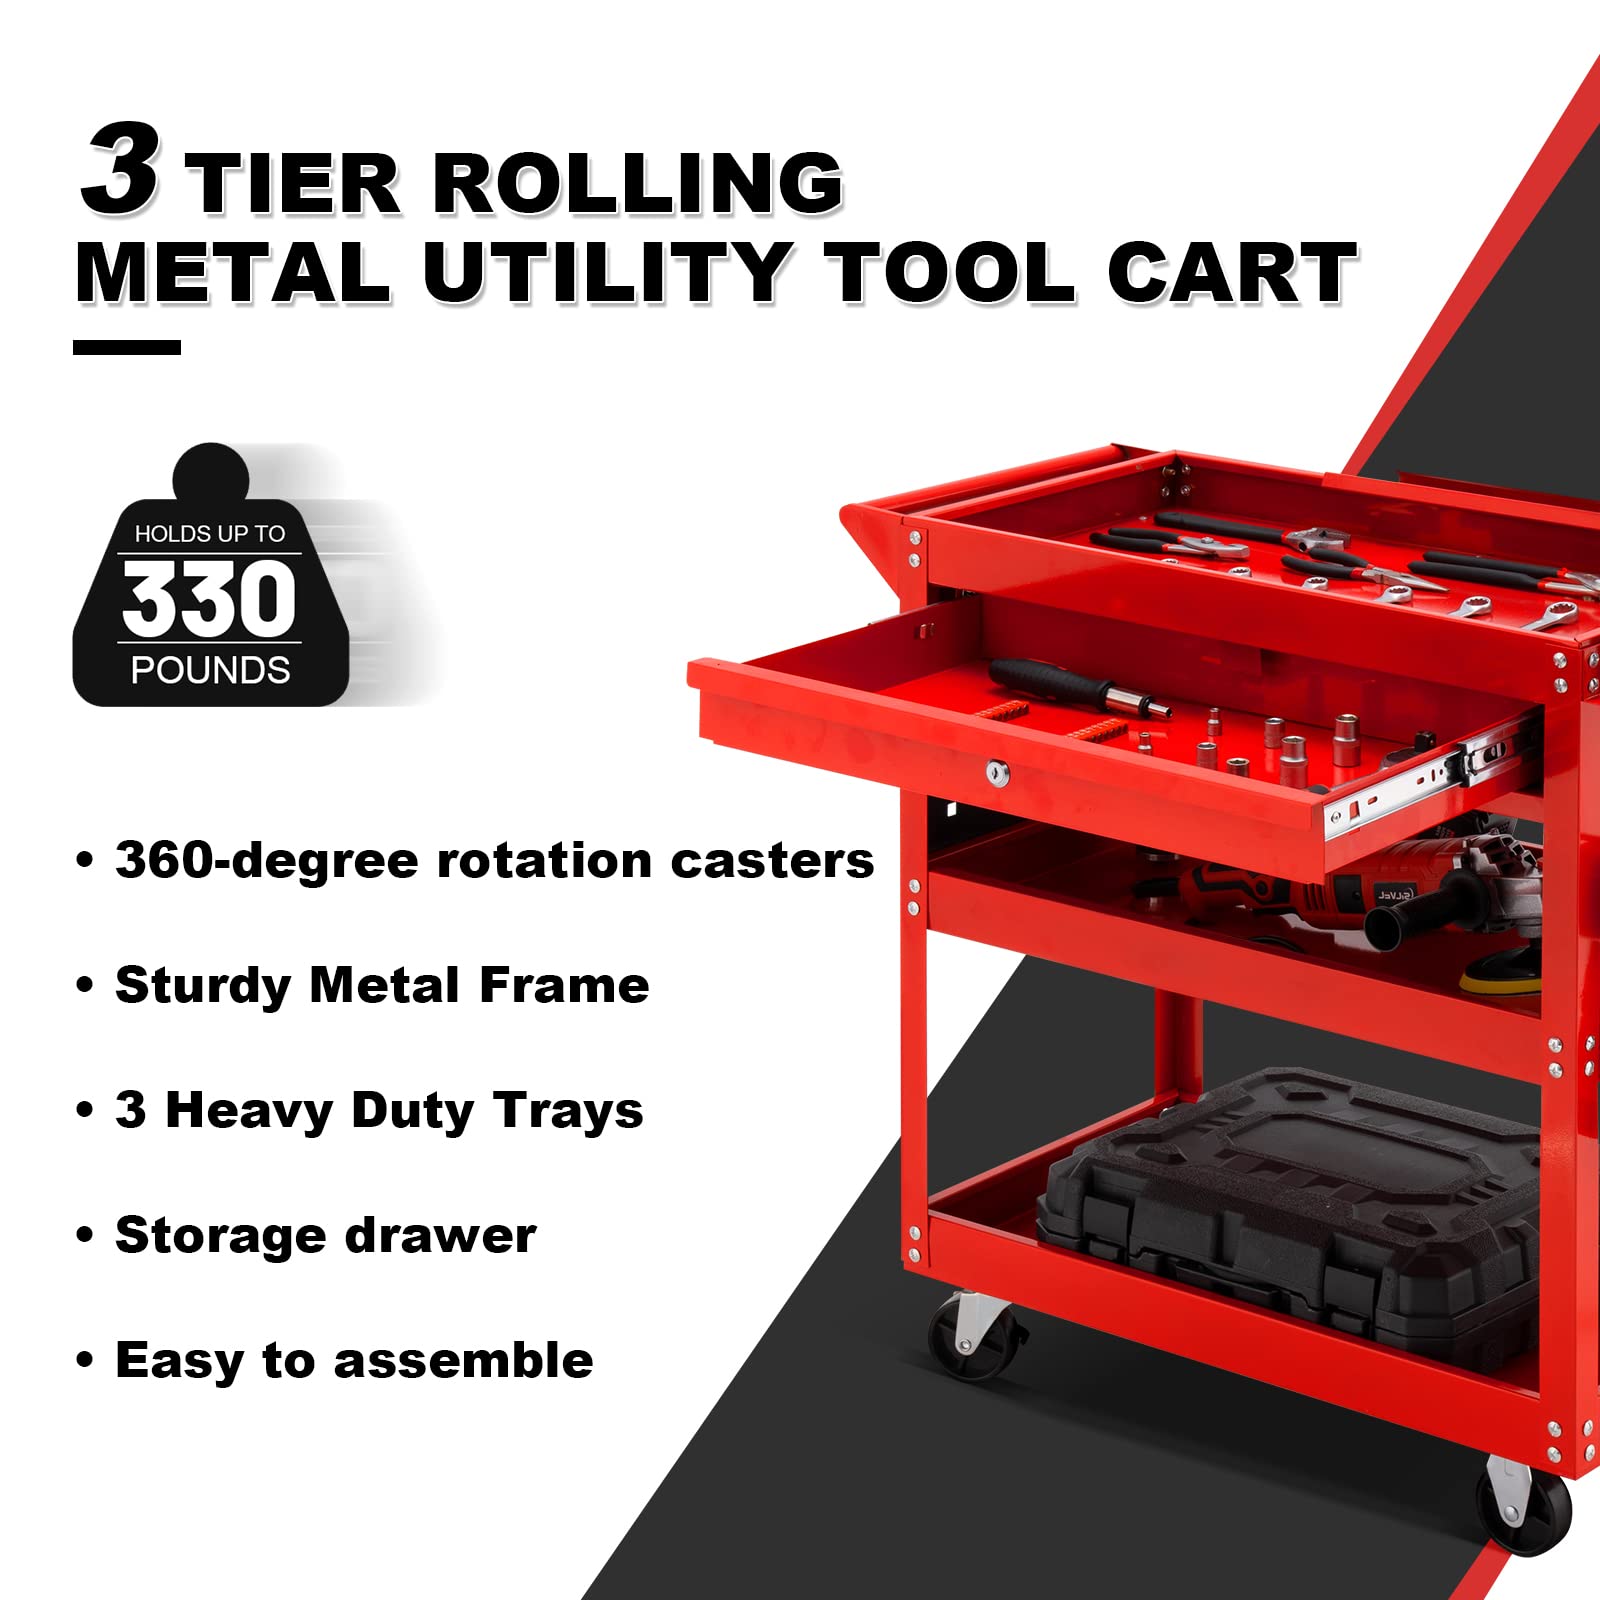 SILVEL 3 Tier Rolling Tool Cart, 330 LBS Capacity Heavy Duty Utility Cart, Industrial Commercial Service Tool Cart, Tool Organizer with Wheels, Storage Drawer, Design for Garage, Warehouse&Repair Shop